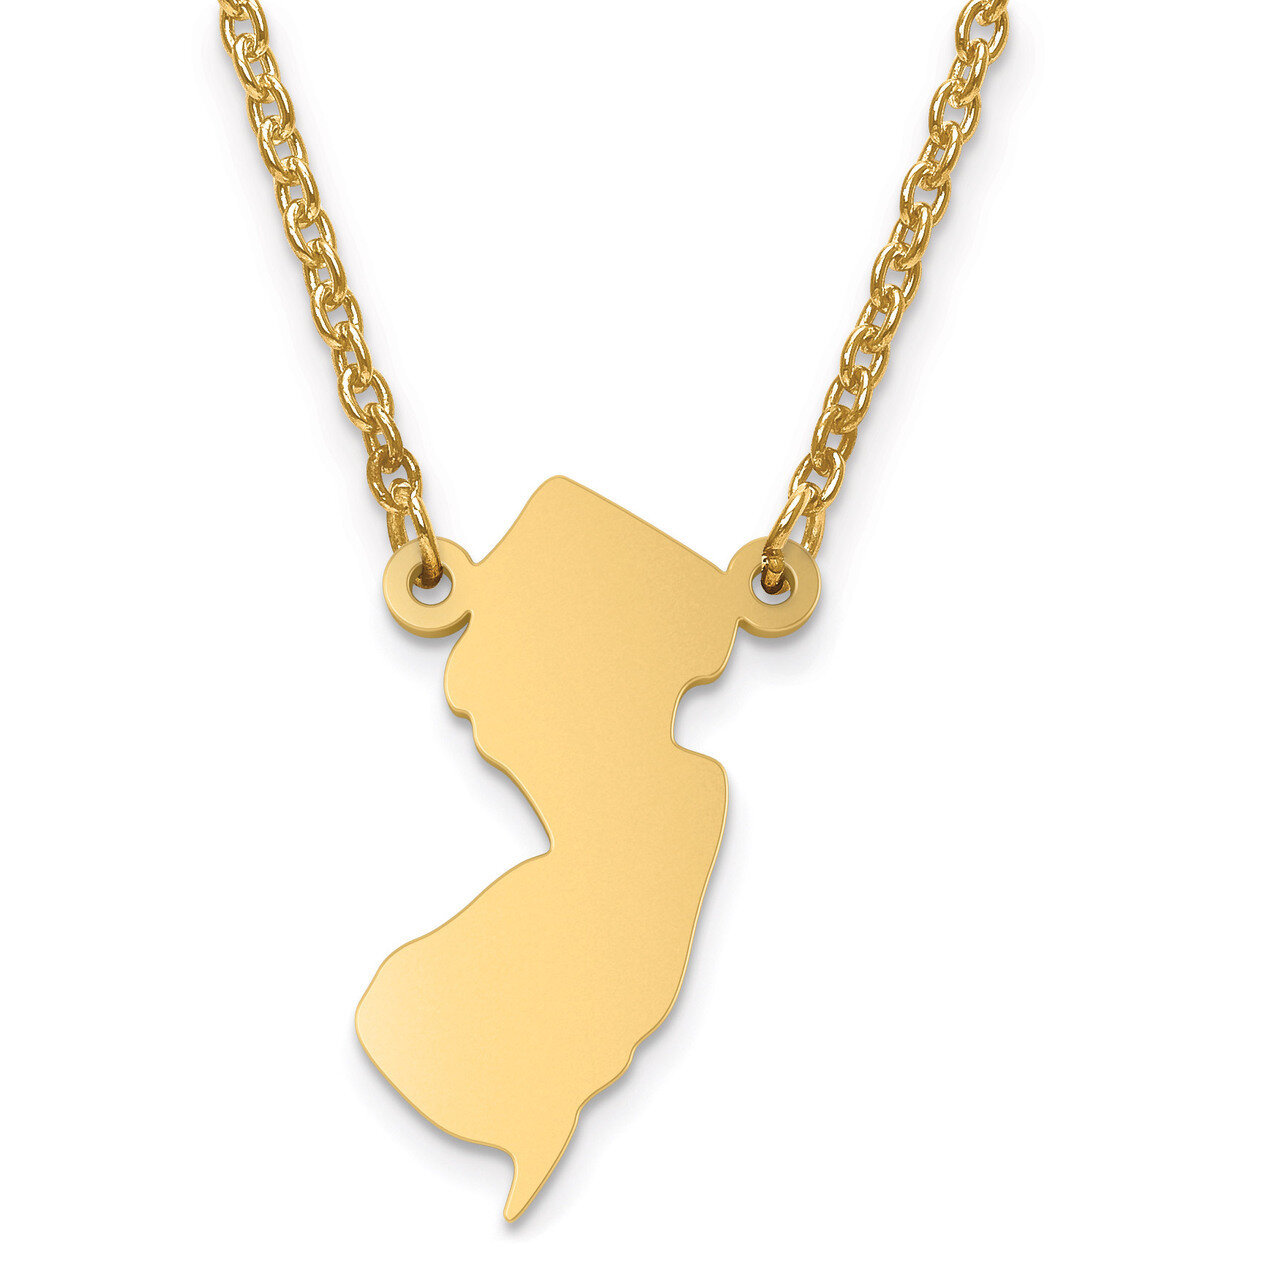 New Jersey State Pendant with Chain Engravable Gold-plated on Sterling Silver